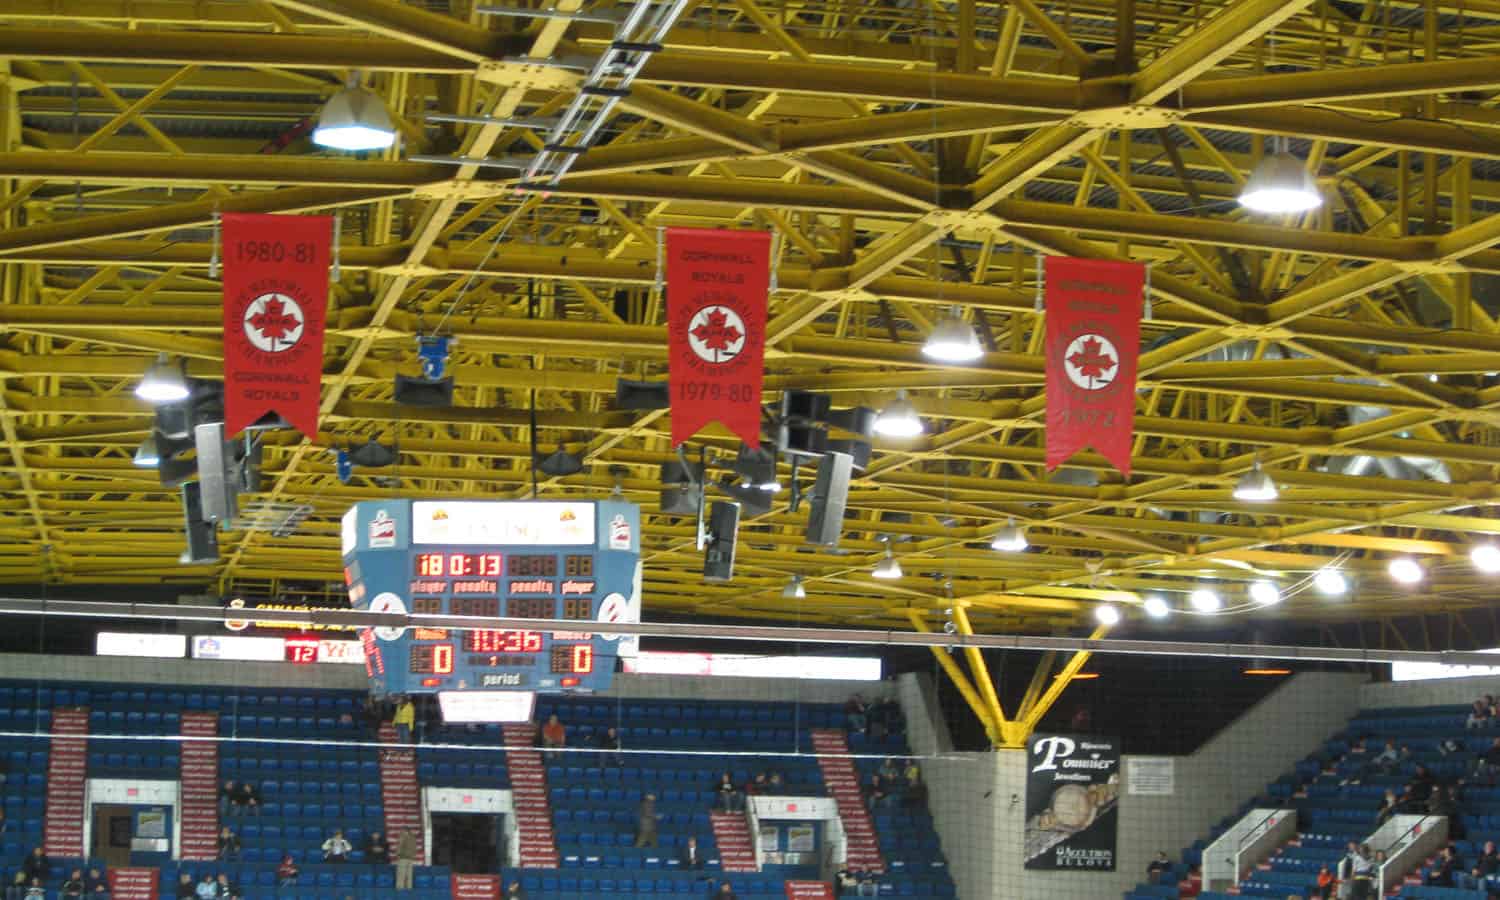 Space-frame roof and Royals Memorial Cup banners